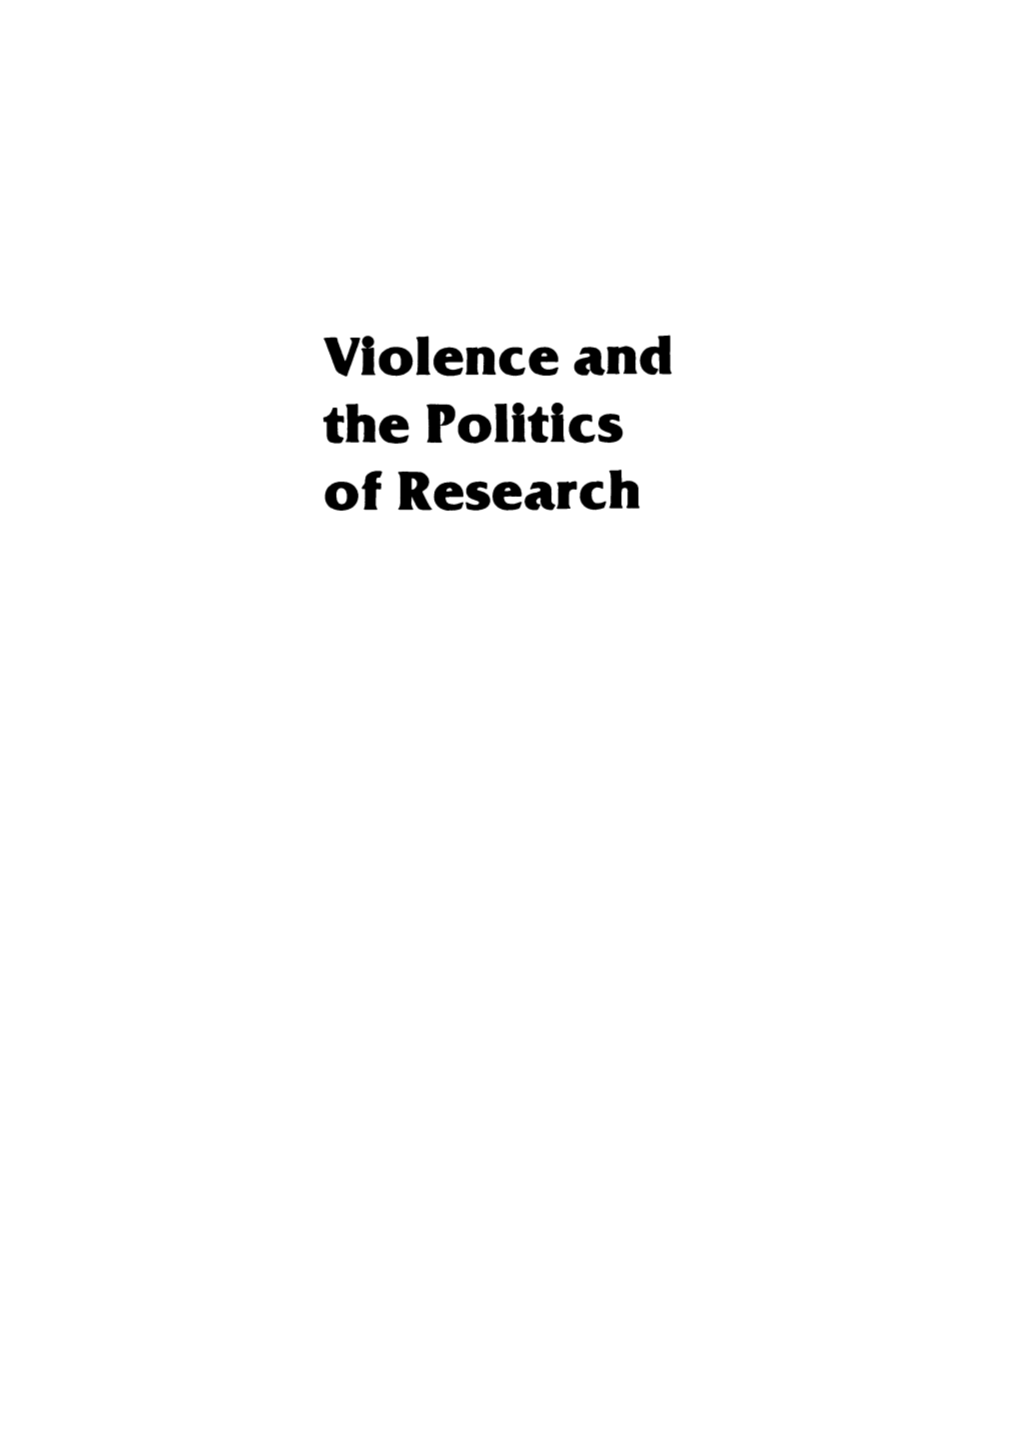 Violence and the Politics of Research the HASTINGS CENTER SERIES in ETHICS